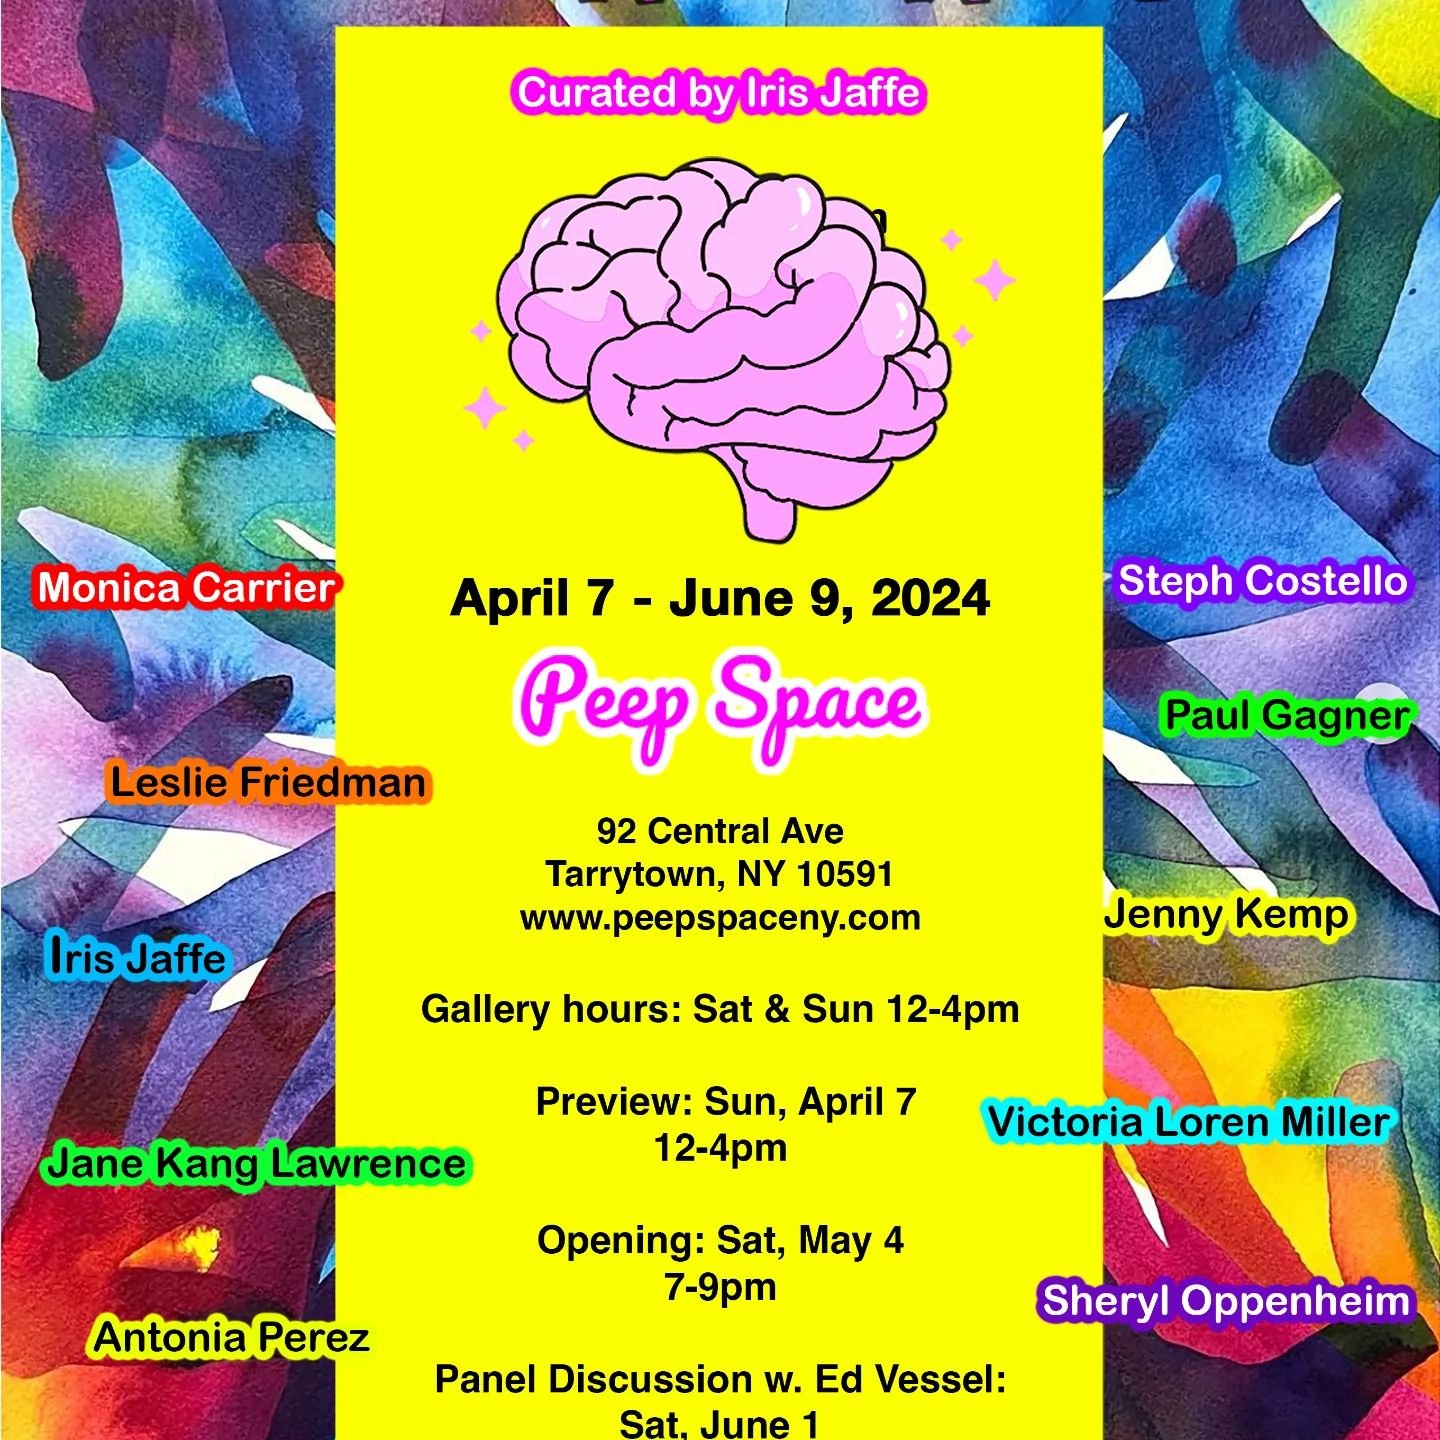 Exhibition Opening on Saturday, May 4th from 7-9pm.

Peep Space is thrilled to announce the opening of Brain Candy - a group exhibition of visual art designed to stimulate 
the senses and emotions. Brain Candy will feature the artwork of twelve artis